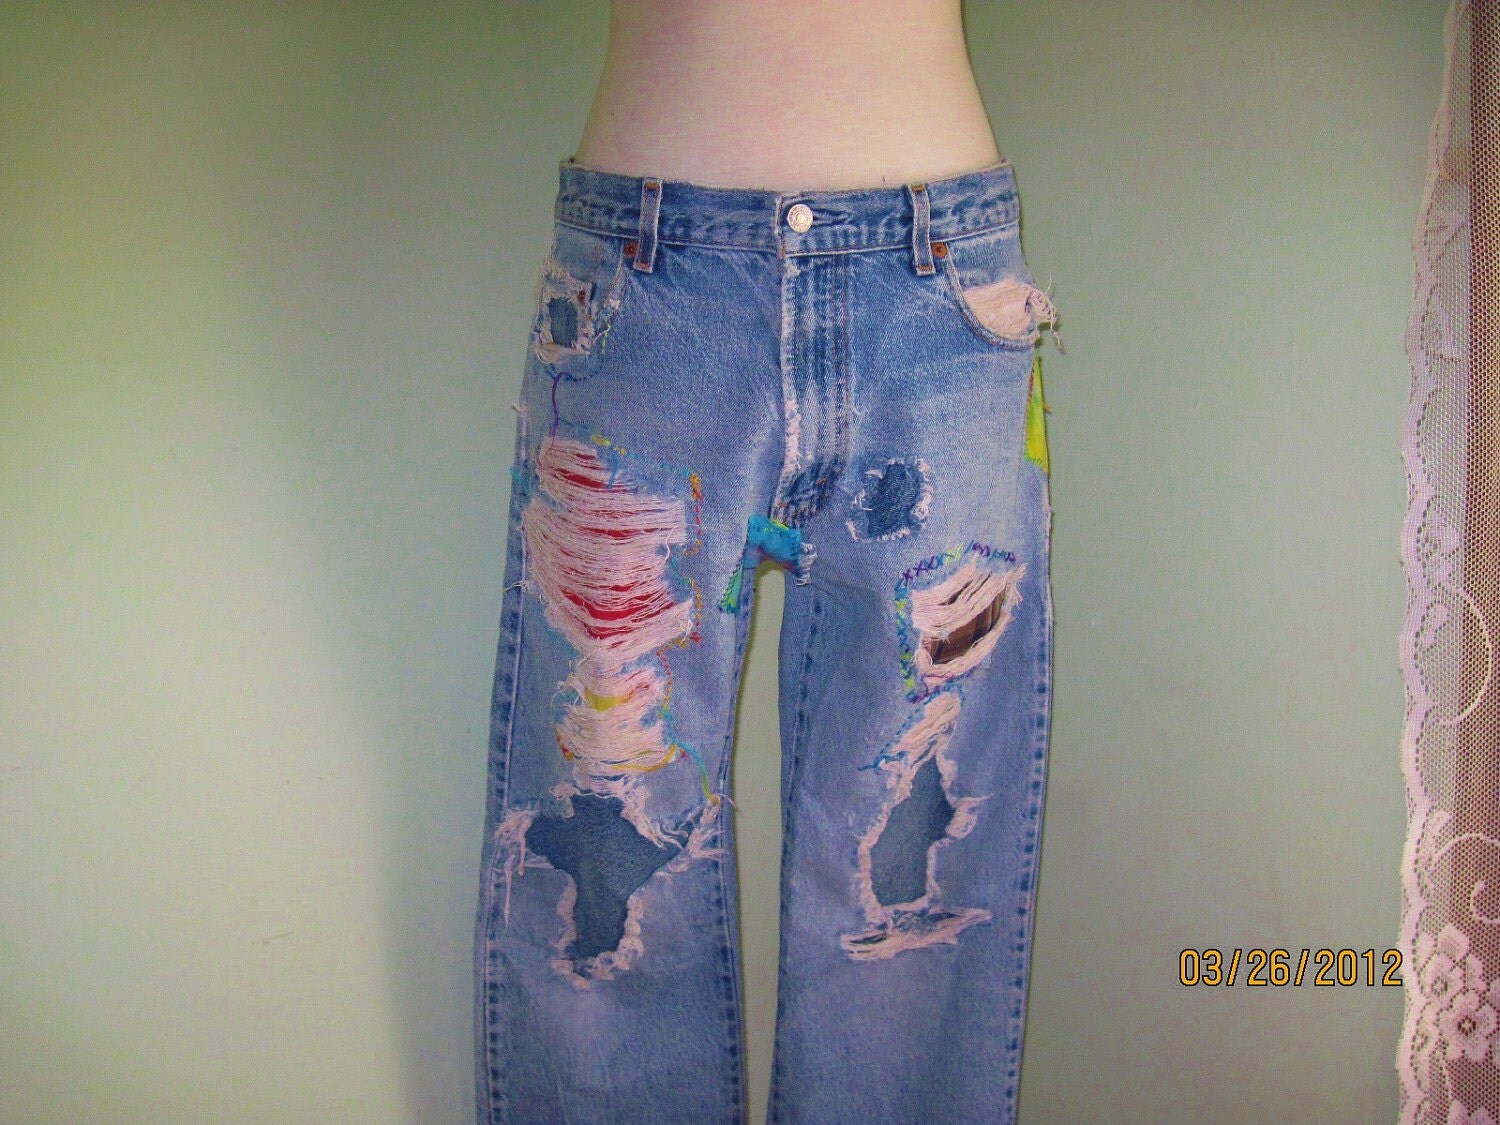 Vintage Levis Jeans / Destroyed Jeans / Patched by TheHippieHabit